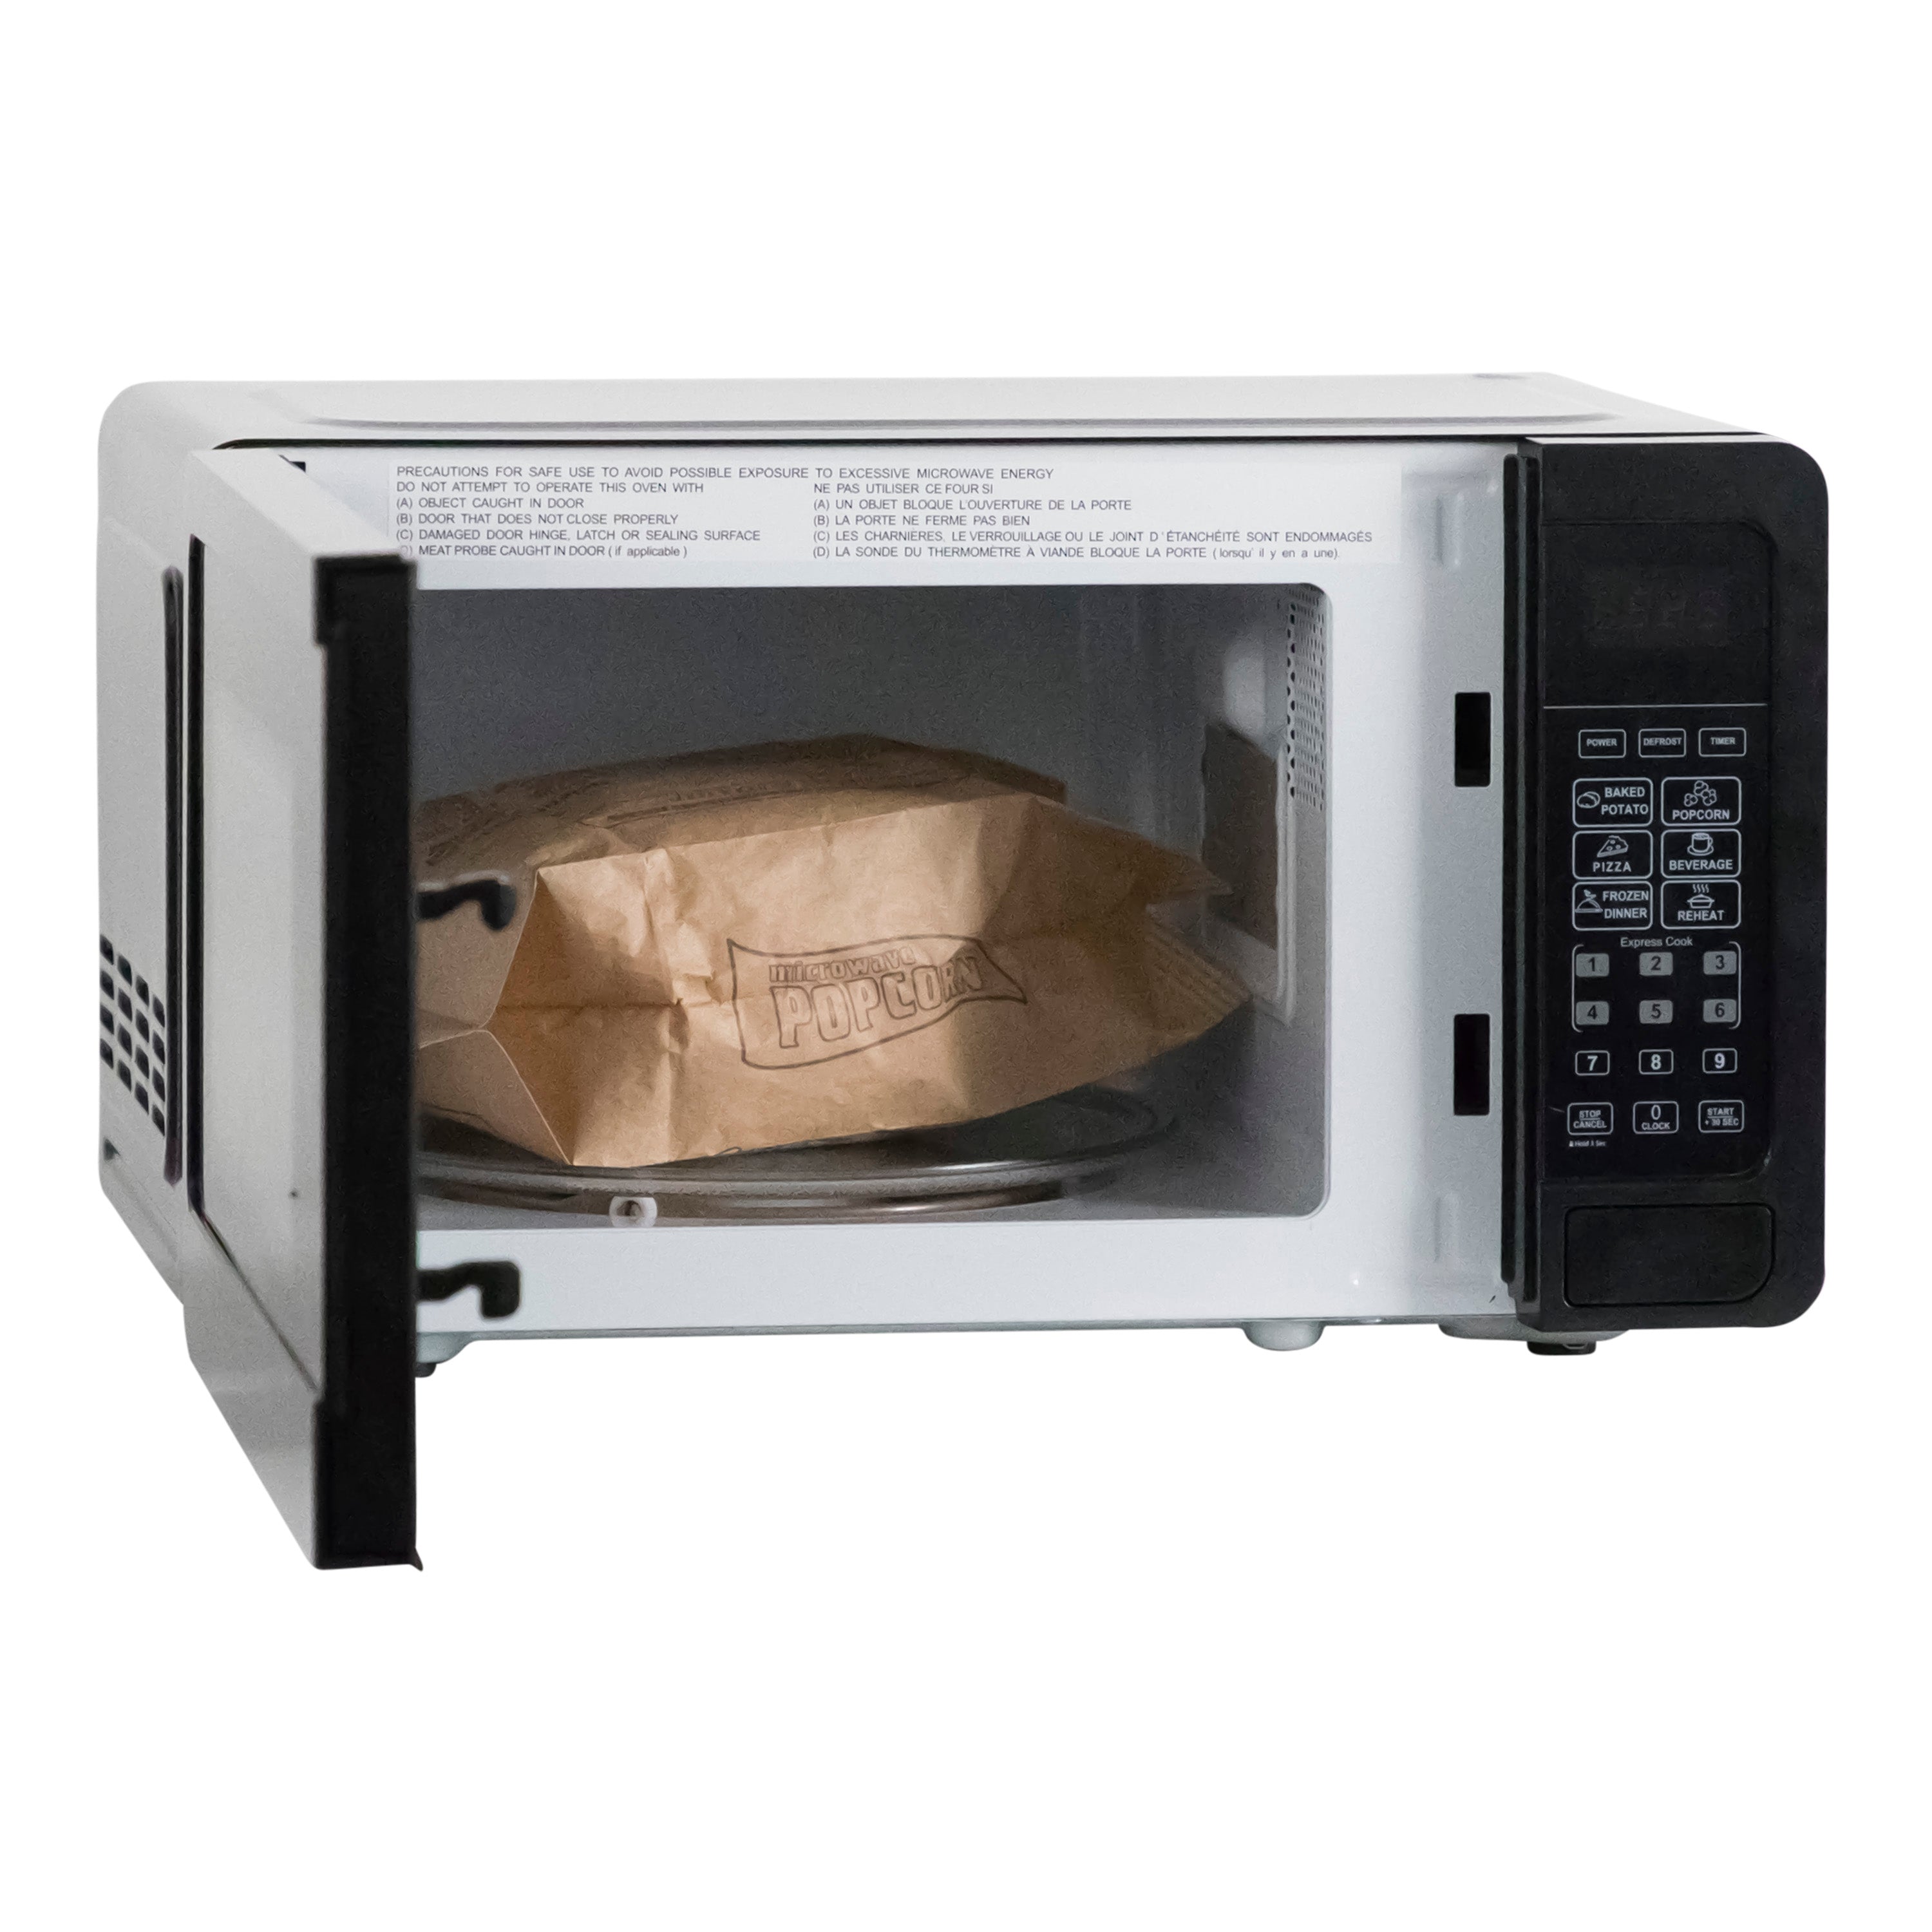 0.7 Cu. Ft. Microwave Oven 700W - Stainless Steel - The Westview Shop